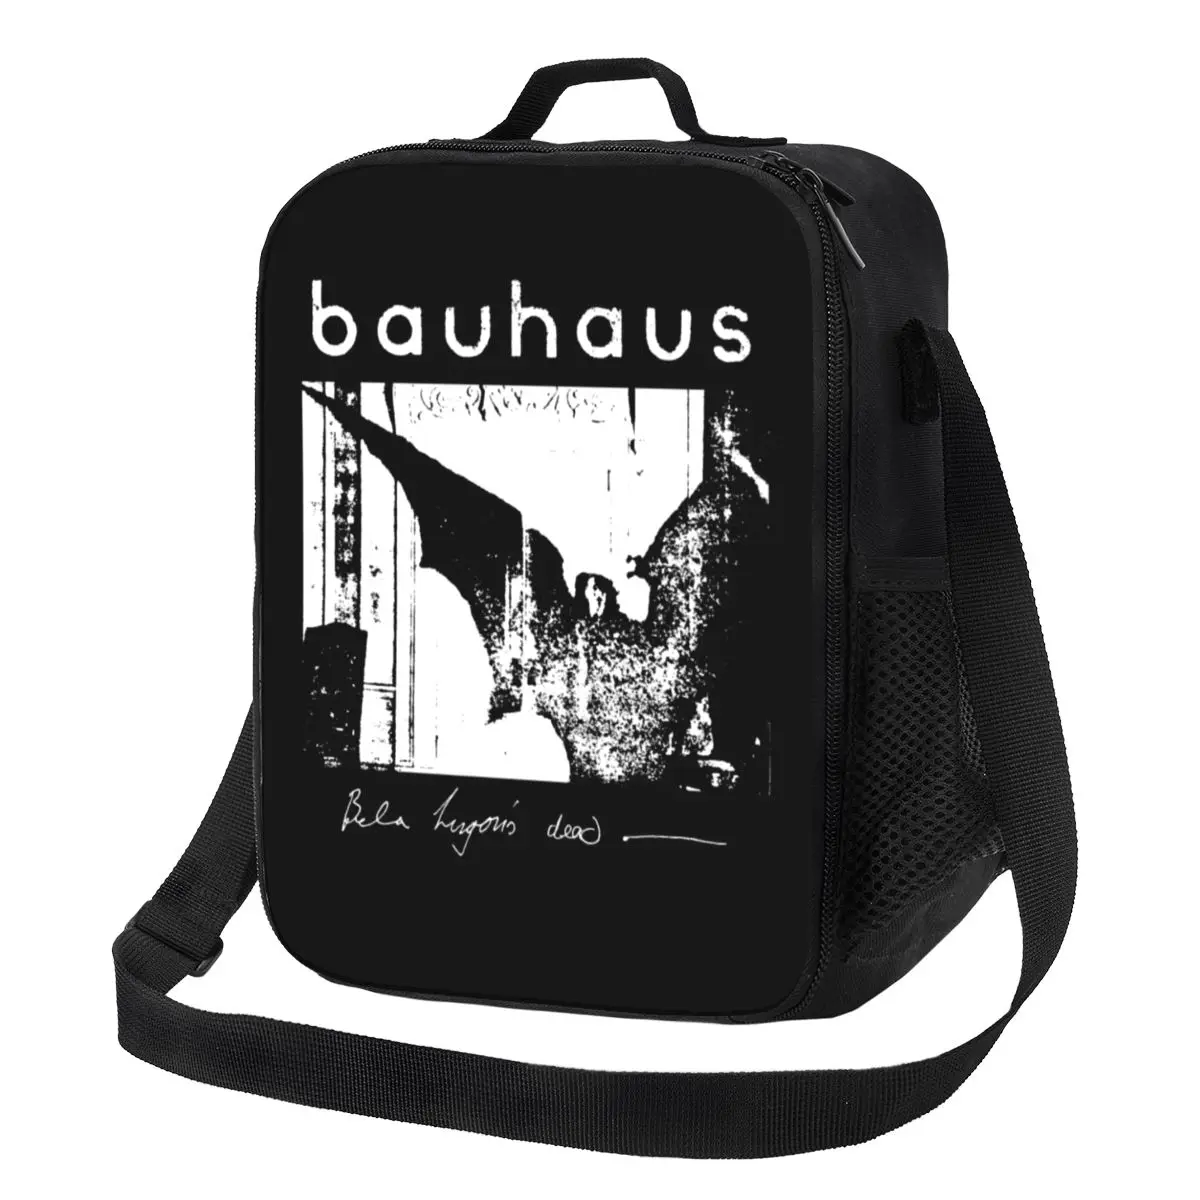 

Gothic Wings Lunch Bag with Handle Bauhaus Bat Wings Bela Lugosis Dead Picnic Cooler Bag Clutch Meal Cool Thermal Bag